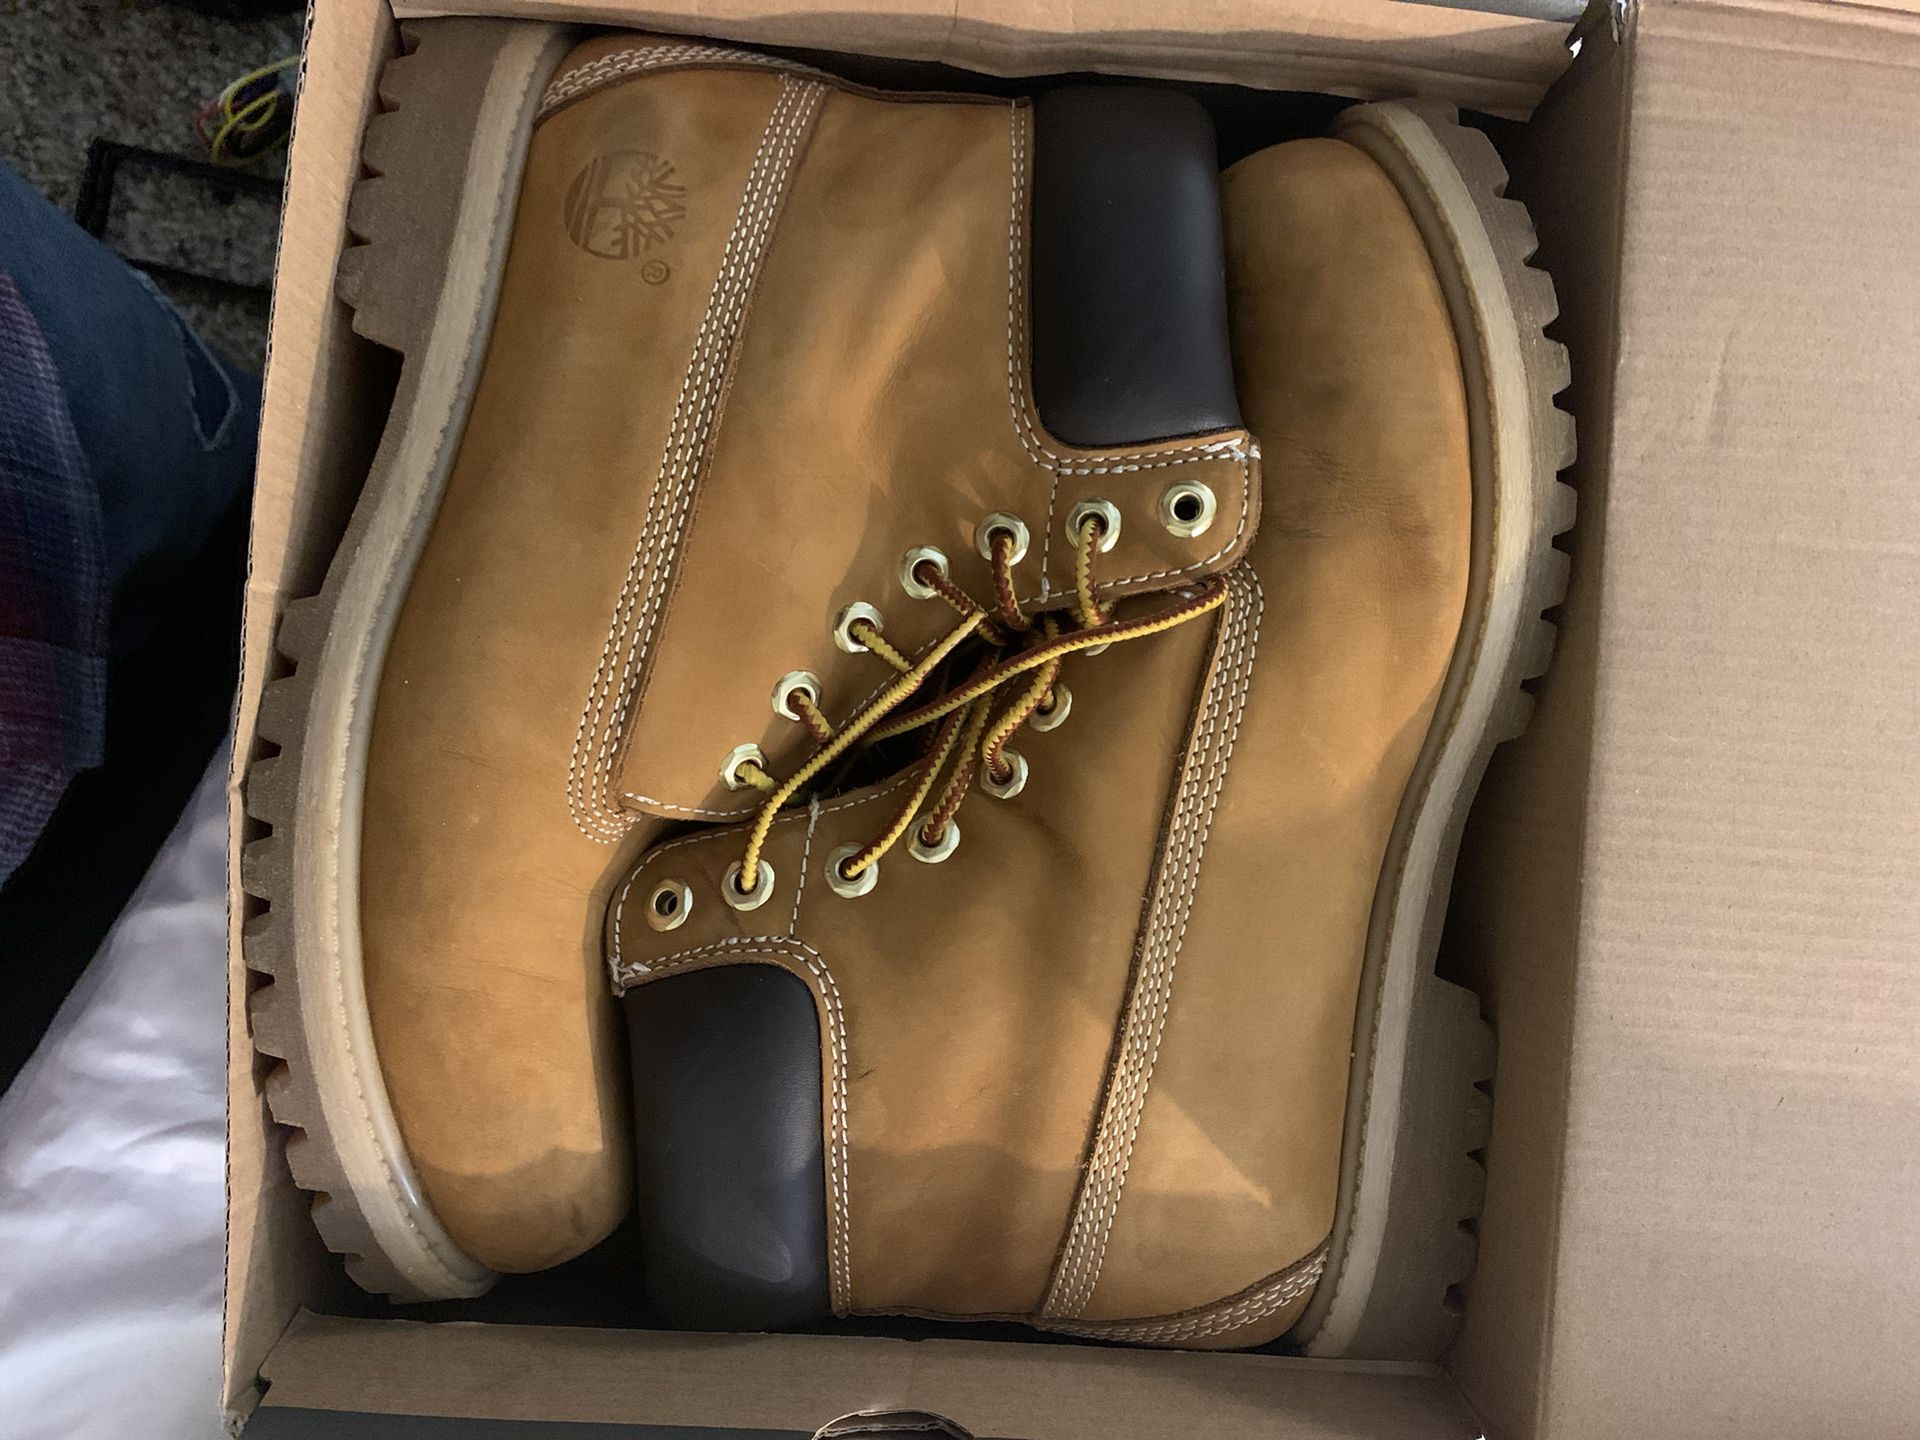 Timberland  Men’s 6”  Premium Waterproof Boots Size 8 Color Wheat